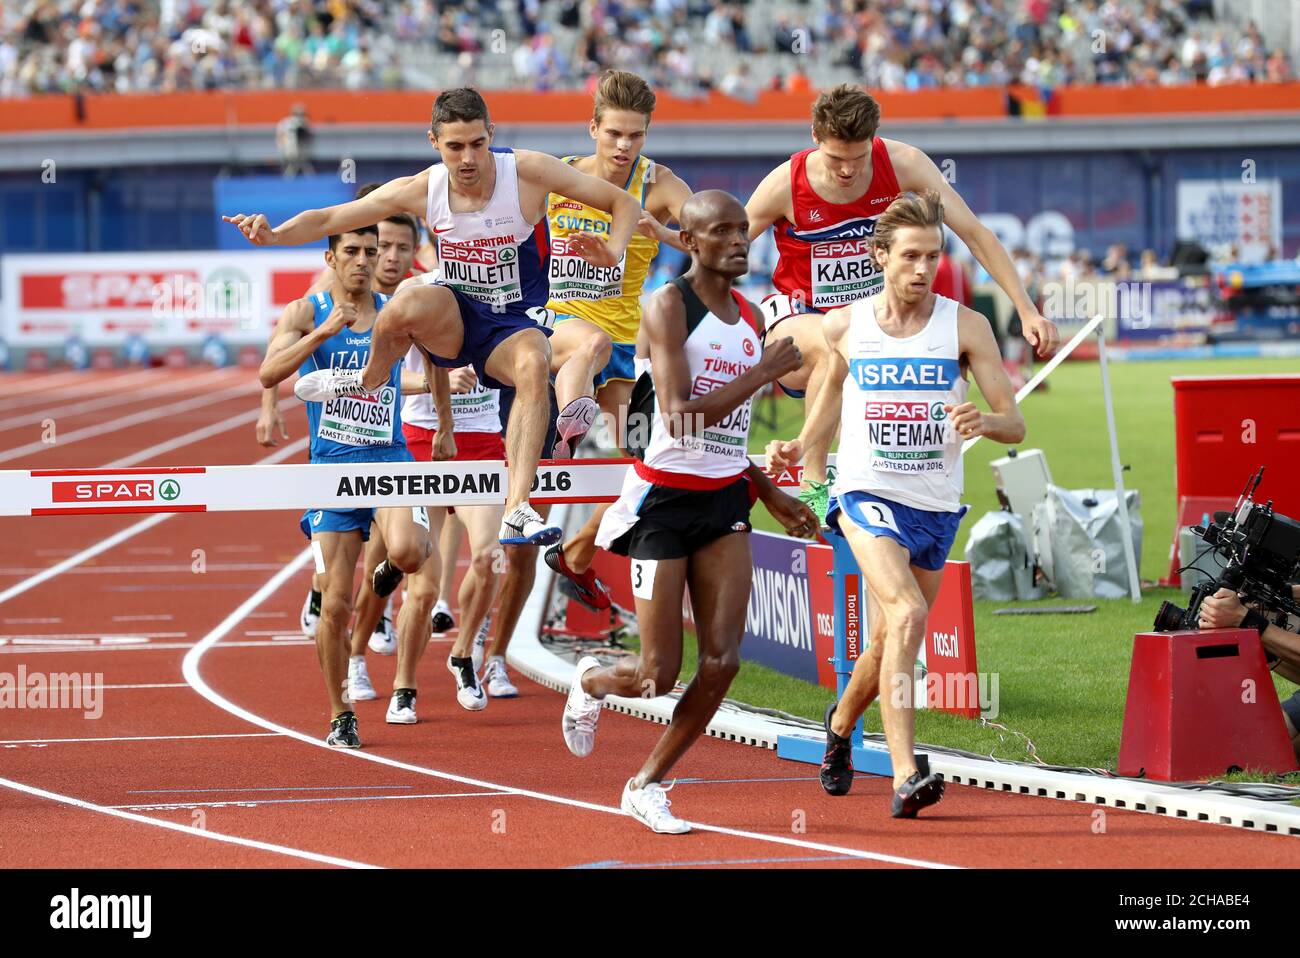 Great Britain's Rob Mullett (left) on his way to finishing fourth during the Men's 3000m Steeplechase Qualifying Round during day one of the 2016 European Athletic Championships at the Olympic Stadium, Amsterdam. Stock Photo